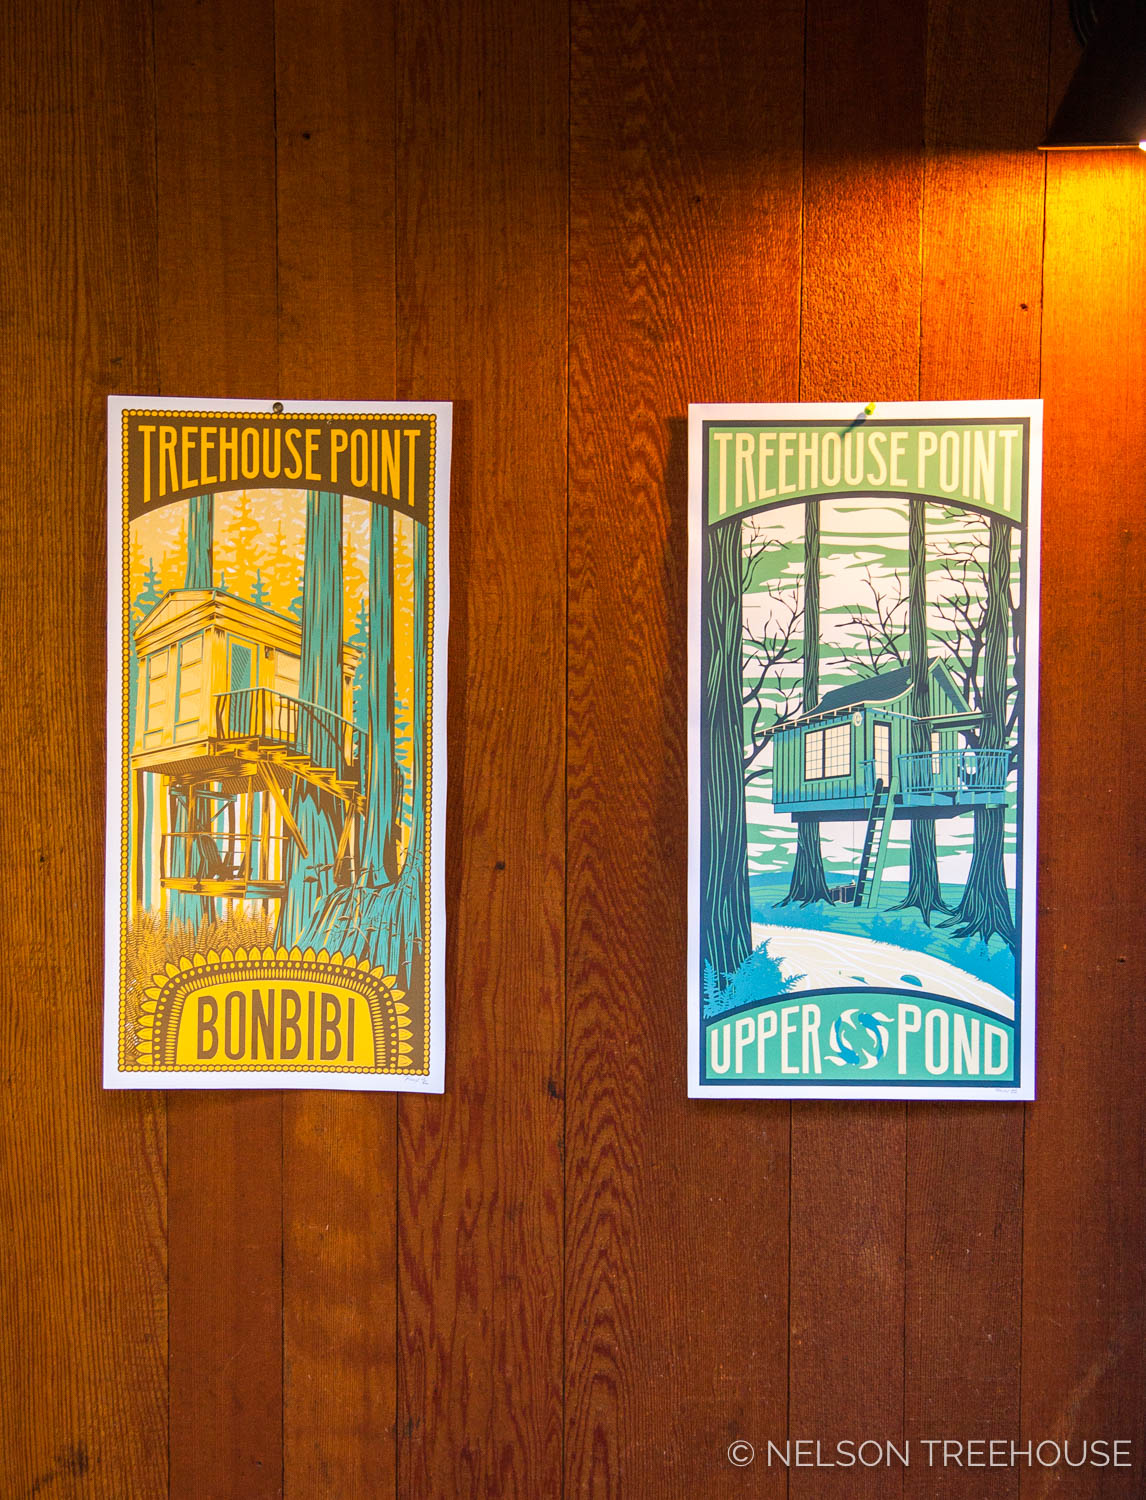  Treehouse Point posters 